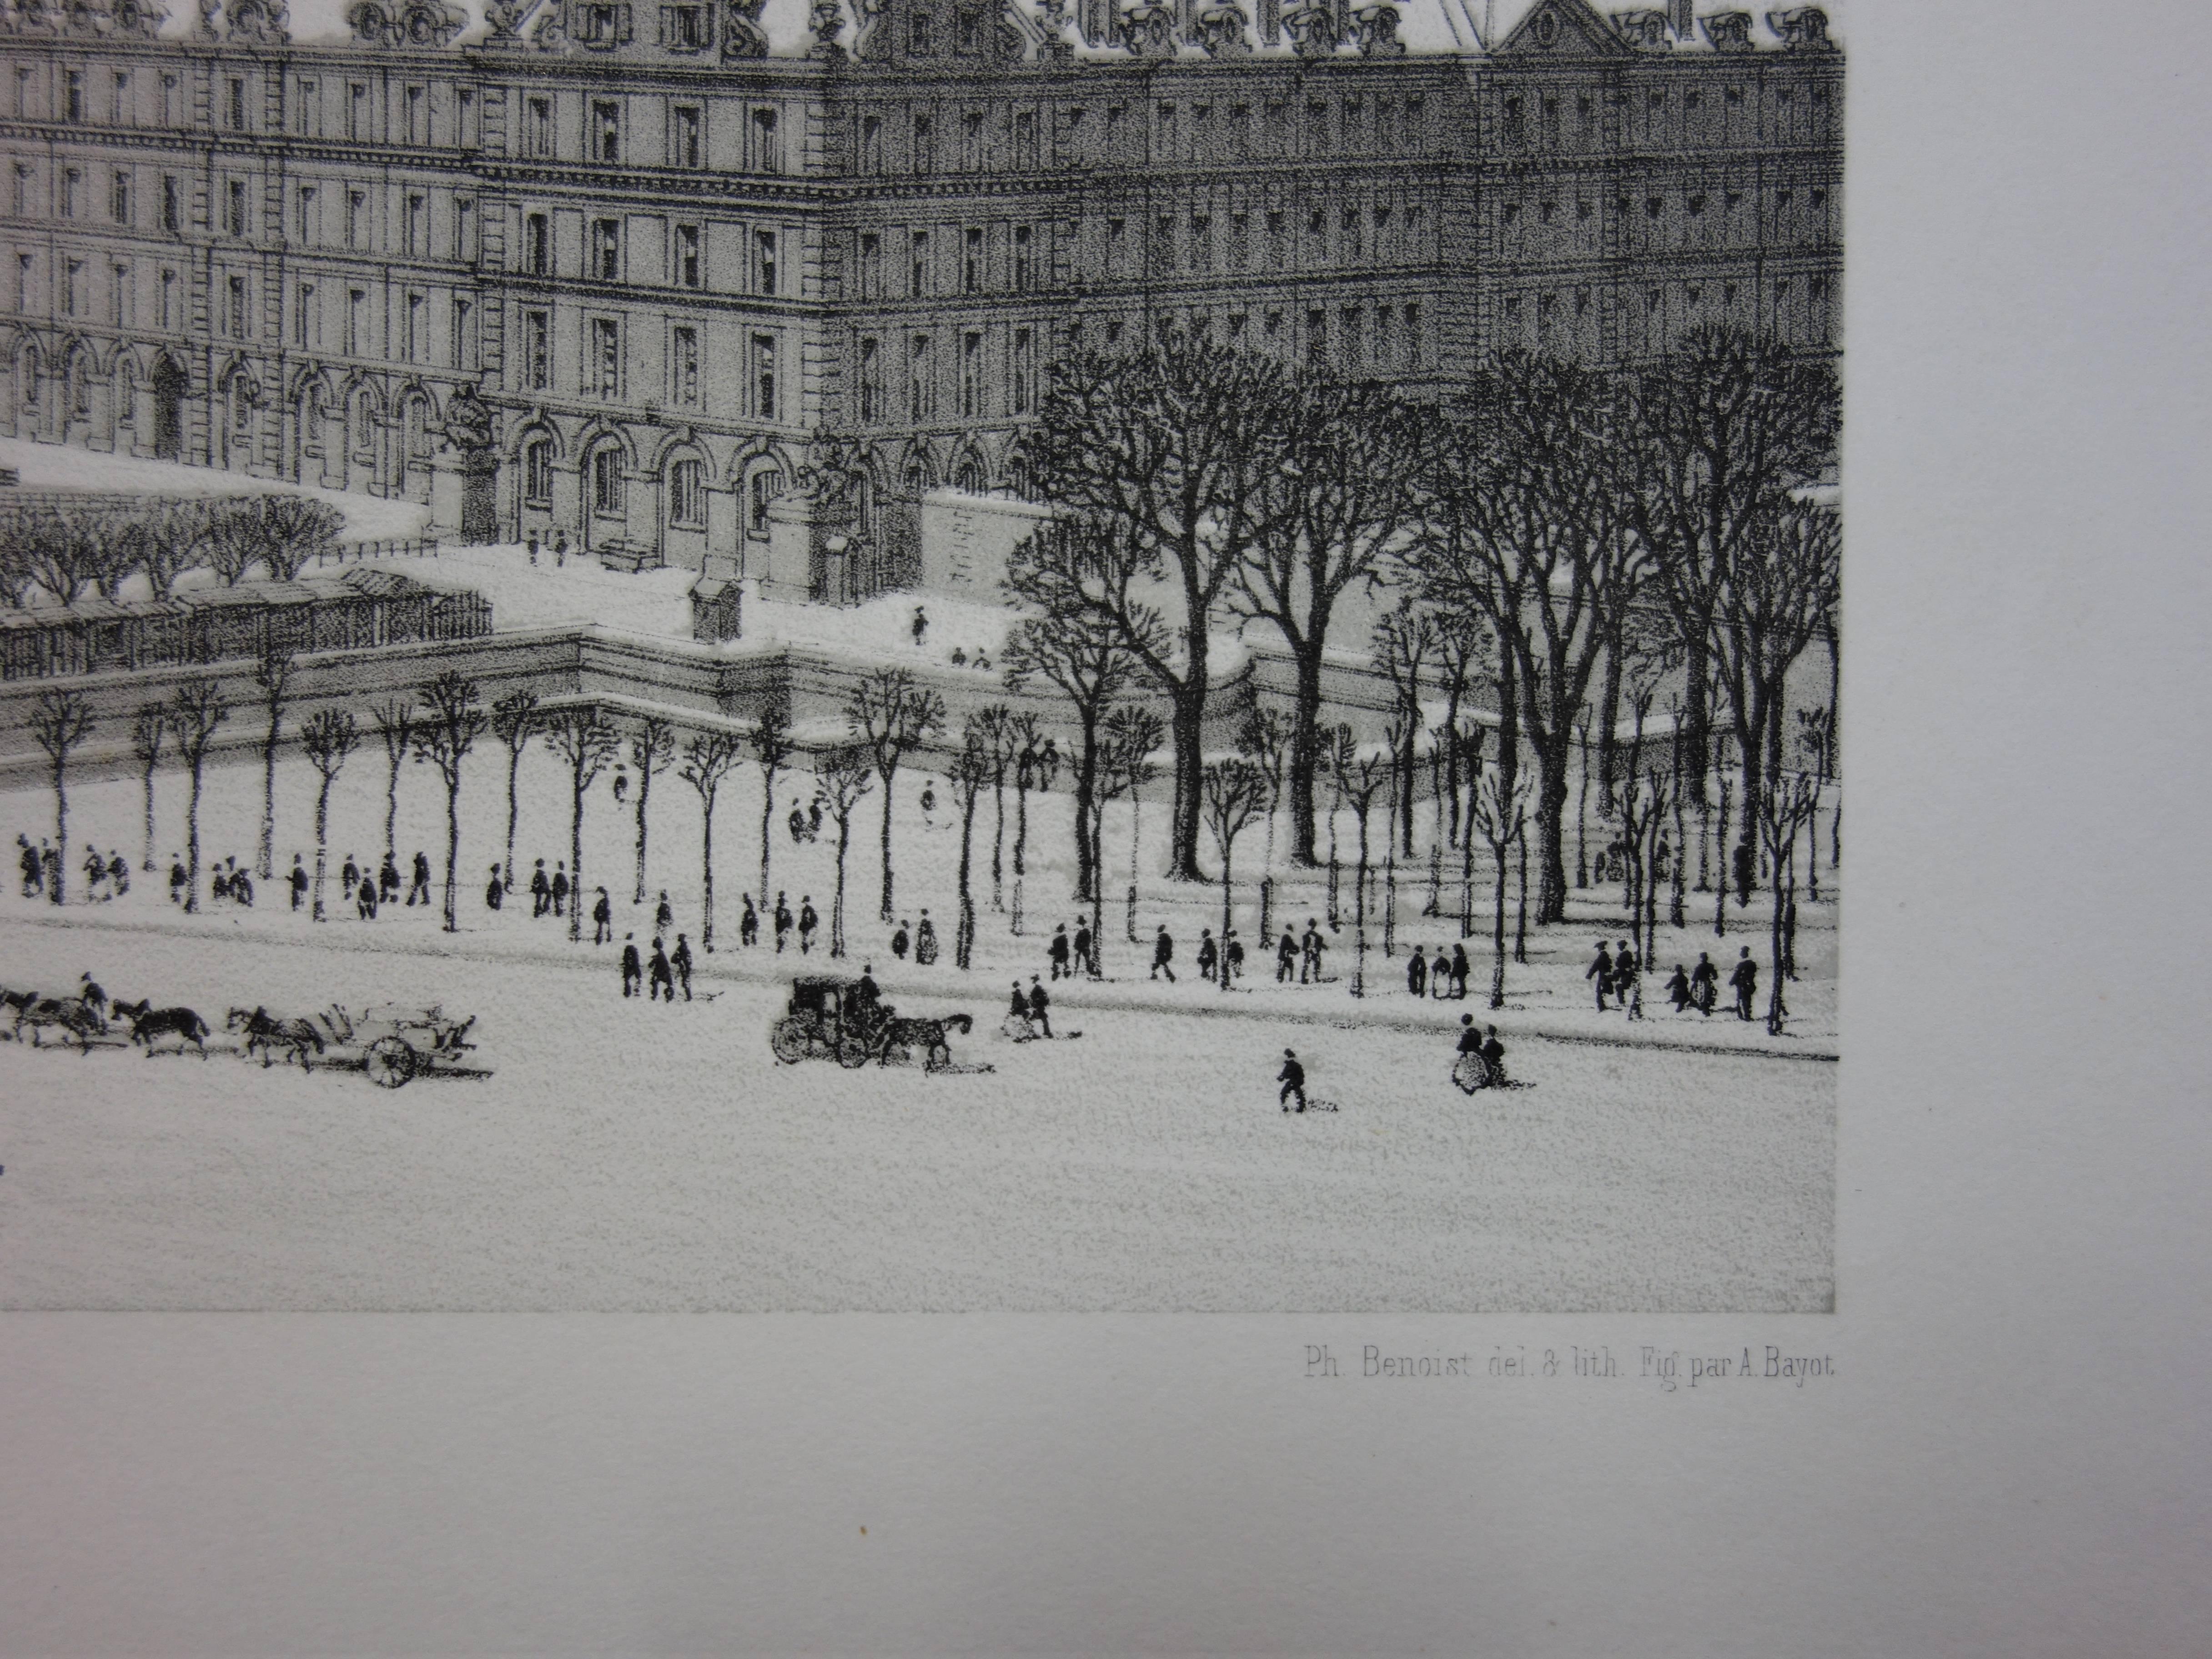 Philippe BENOIST
Paris : Les Invalides Under the Snow - 1861

Original two tones stone lithographs
Printed name of the artist bottom right
On vellum 33.5 x 49 cm (c. 13 x 20 inch)

Information : Edited in 1861 by Charpentier, this lithograph is part